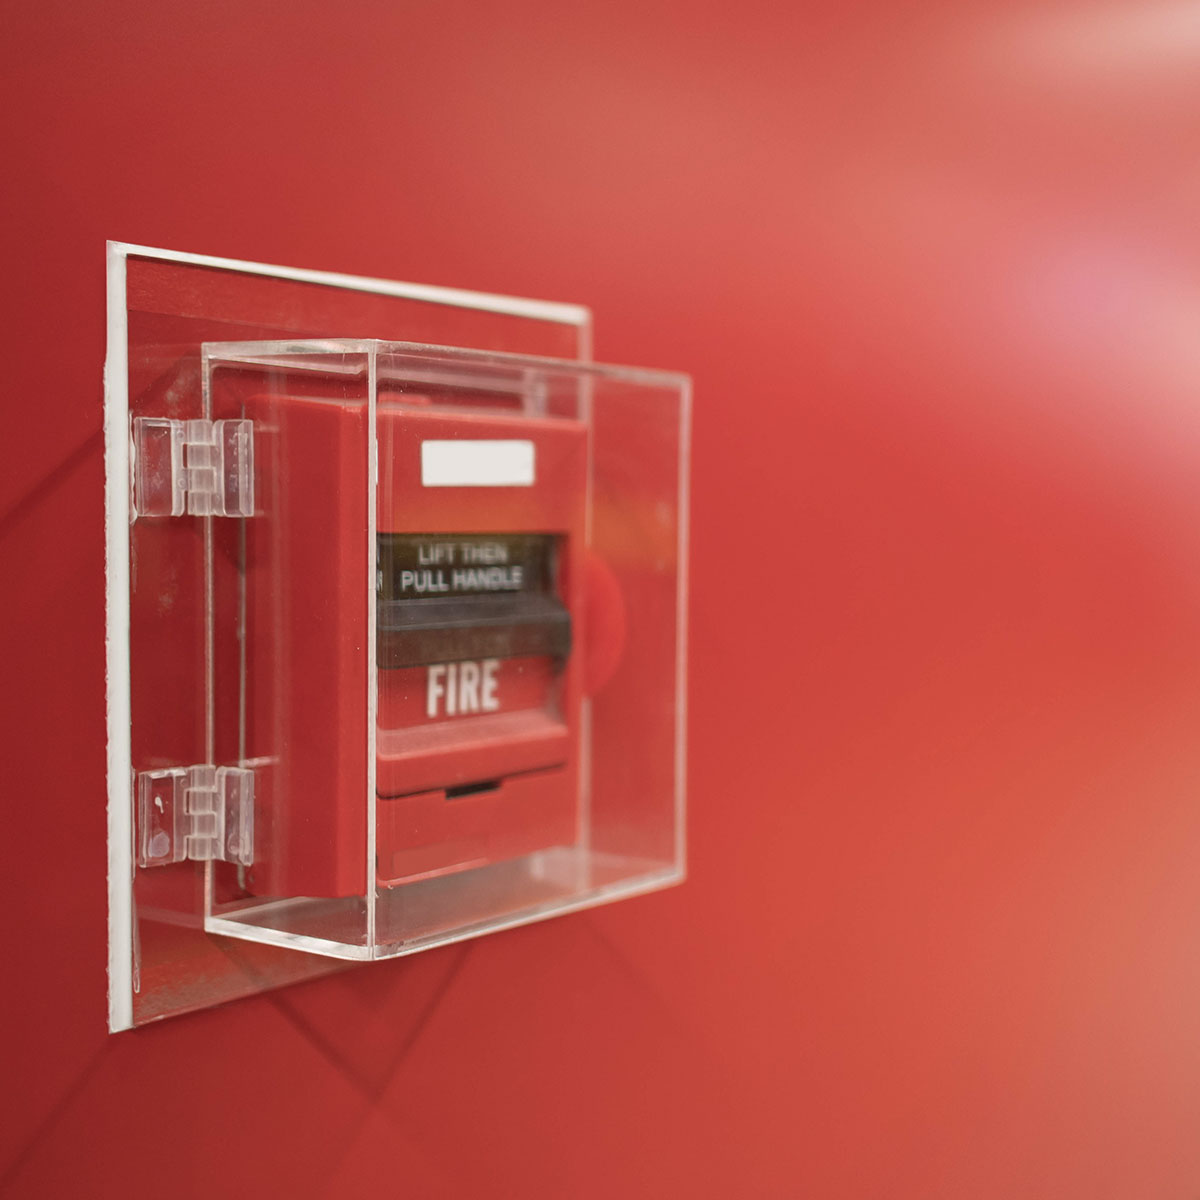 Fire Panels Alarm Systems